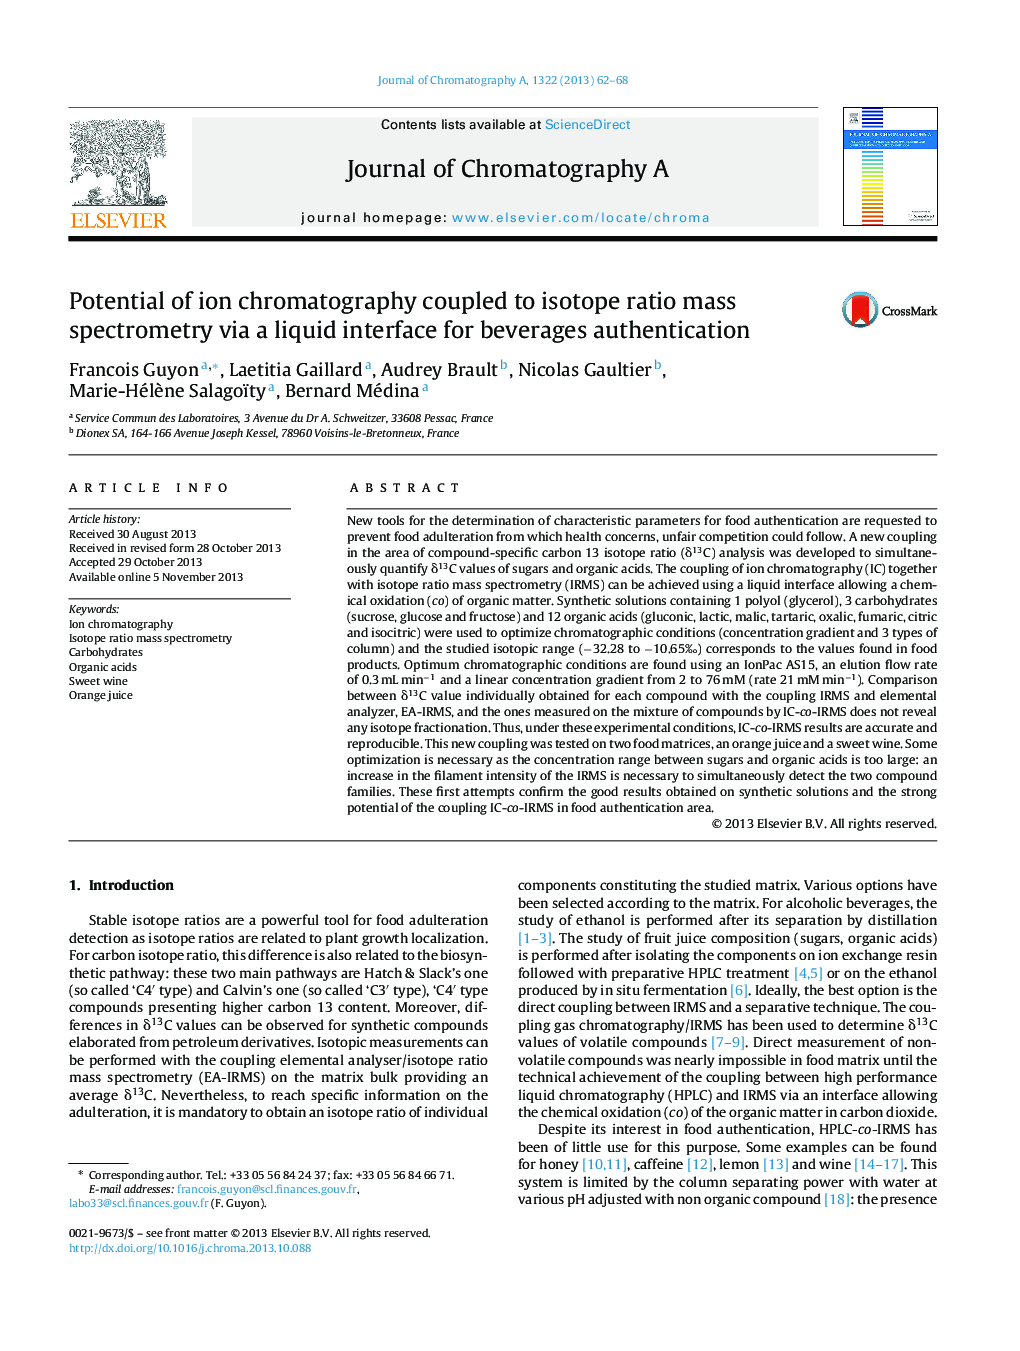 Potential of ion chromatography coupled to isotope ratio mass spectrometry via a liquid interface for beverages authentication